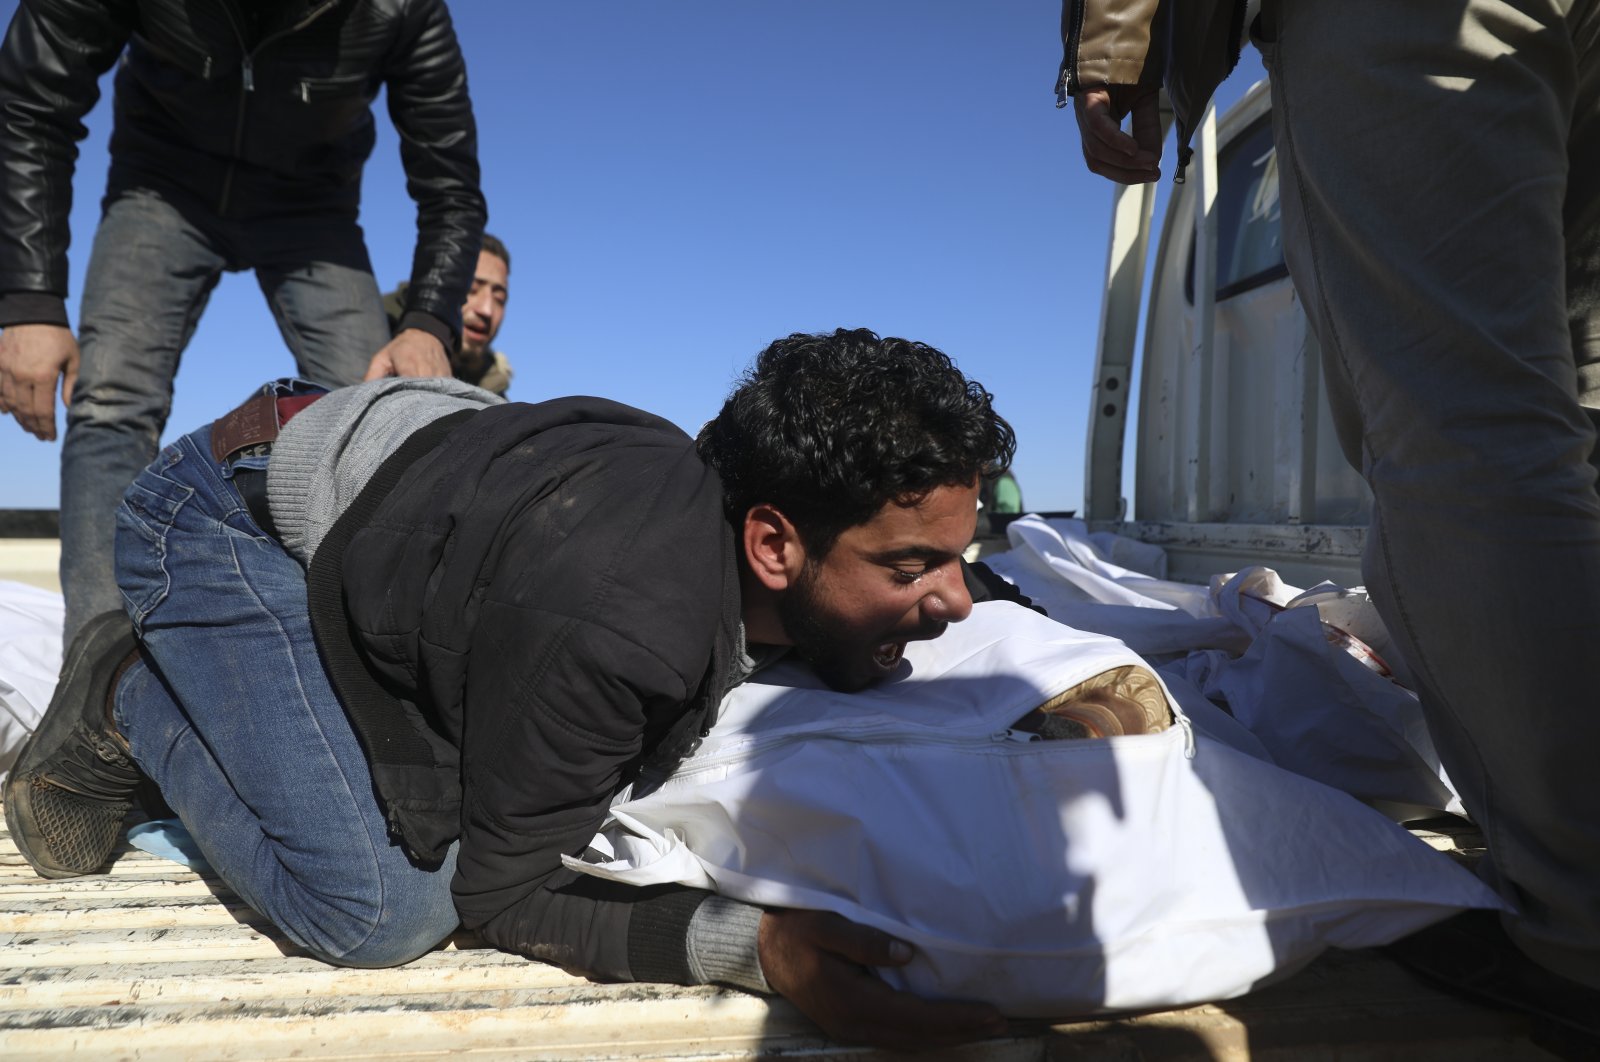 A man mourns over the bodies during the funeral of six family members filed in shelling in the Maaret al-Naasan village in Idlib province, Syria, Feb. 12, 2022. (AP Photo)